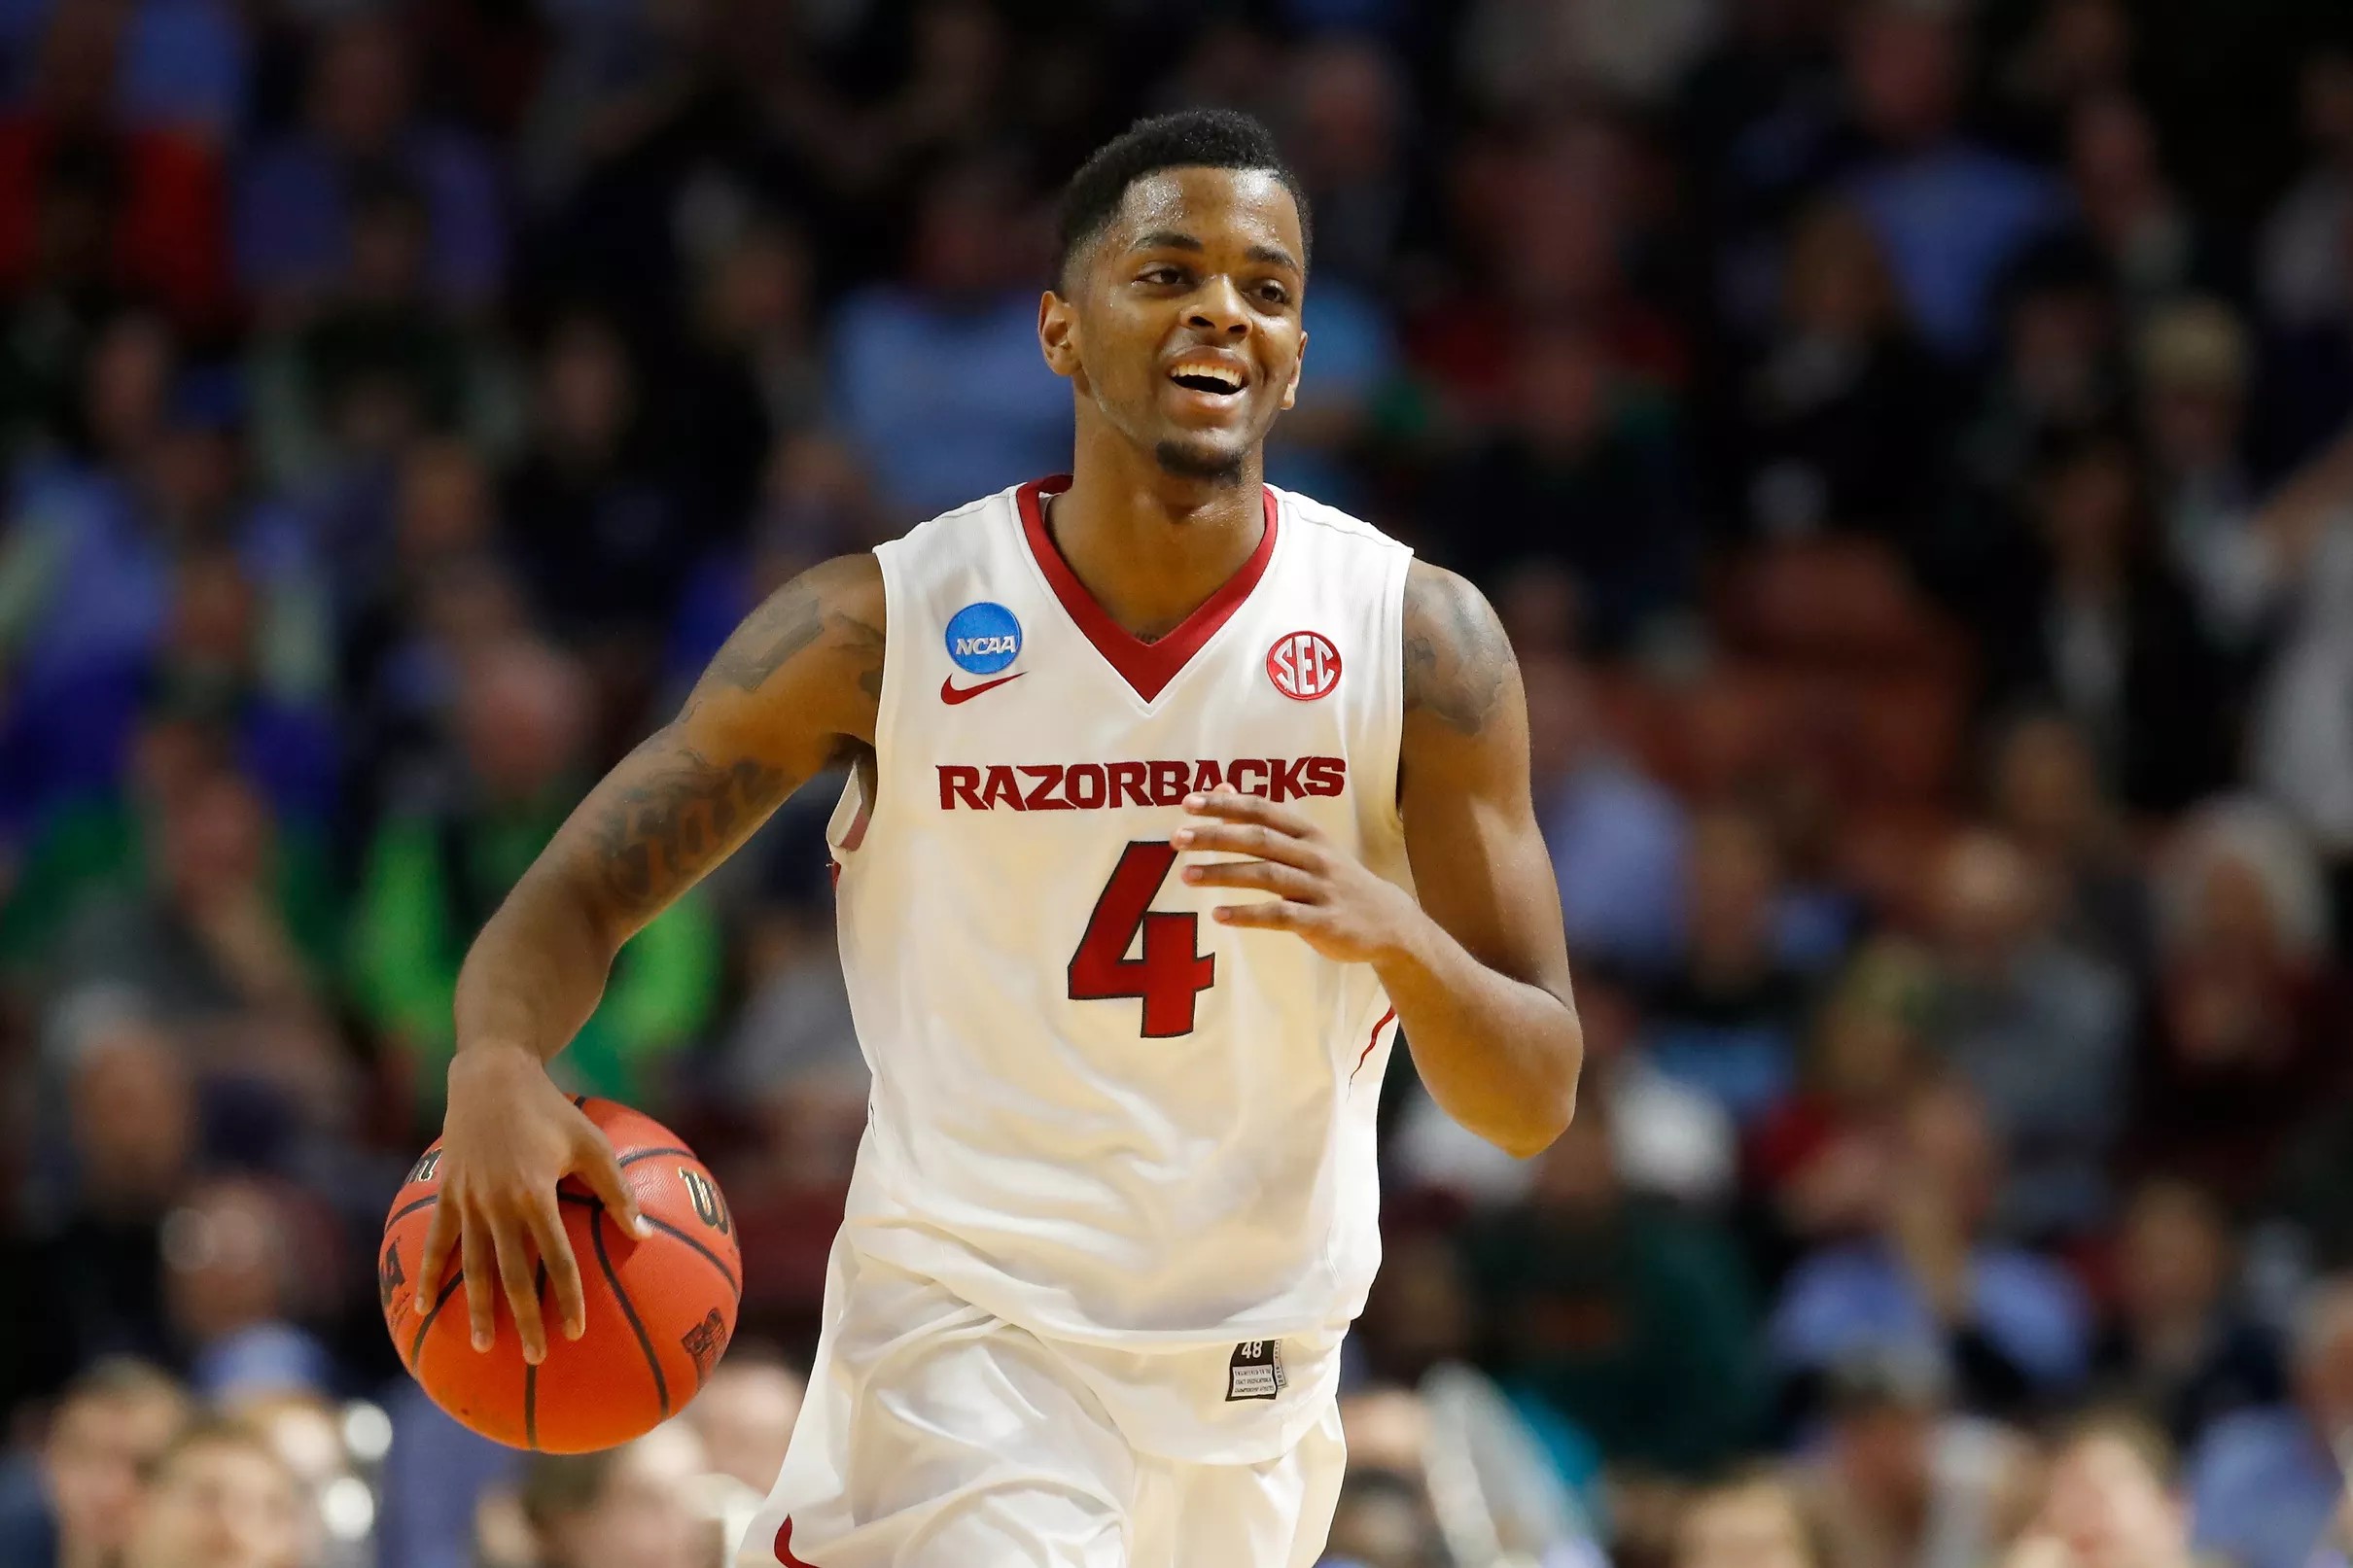 Arkansas Basketball Picked to Finish 6th in SEC